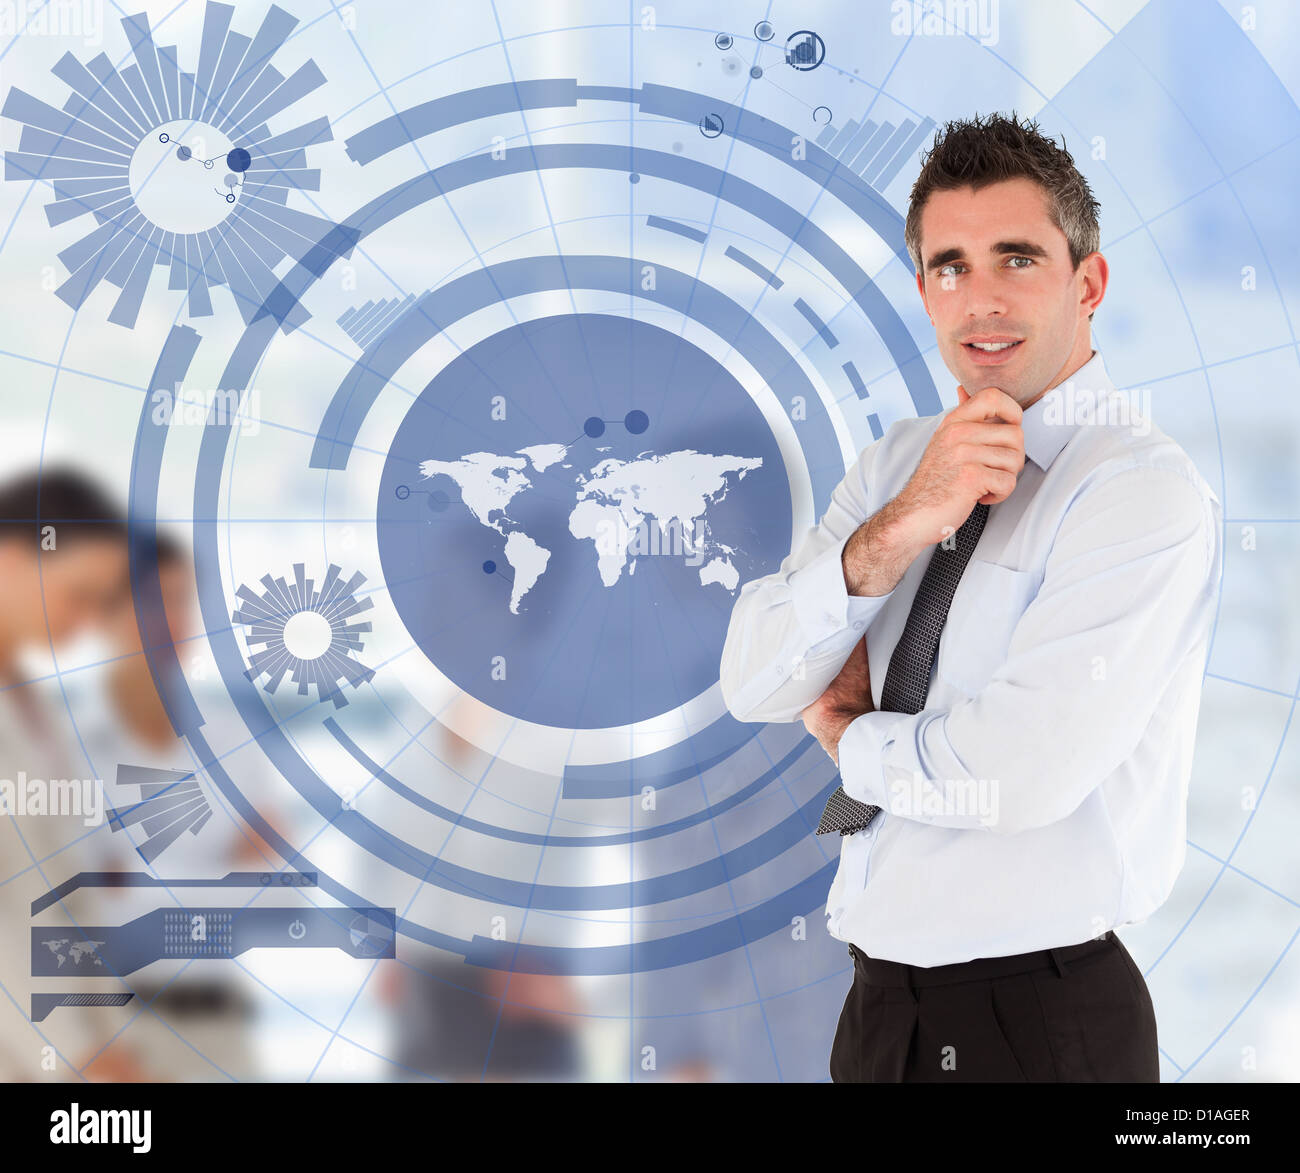 Salesman with a blue world map illustration Stock Photo